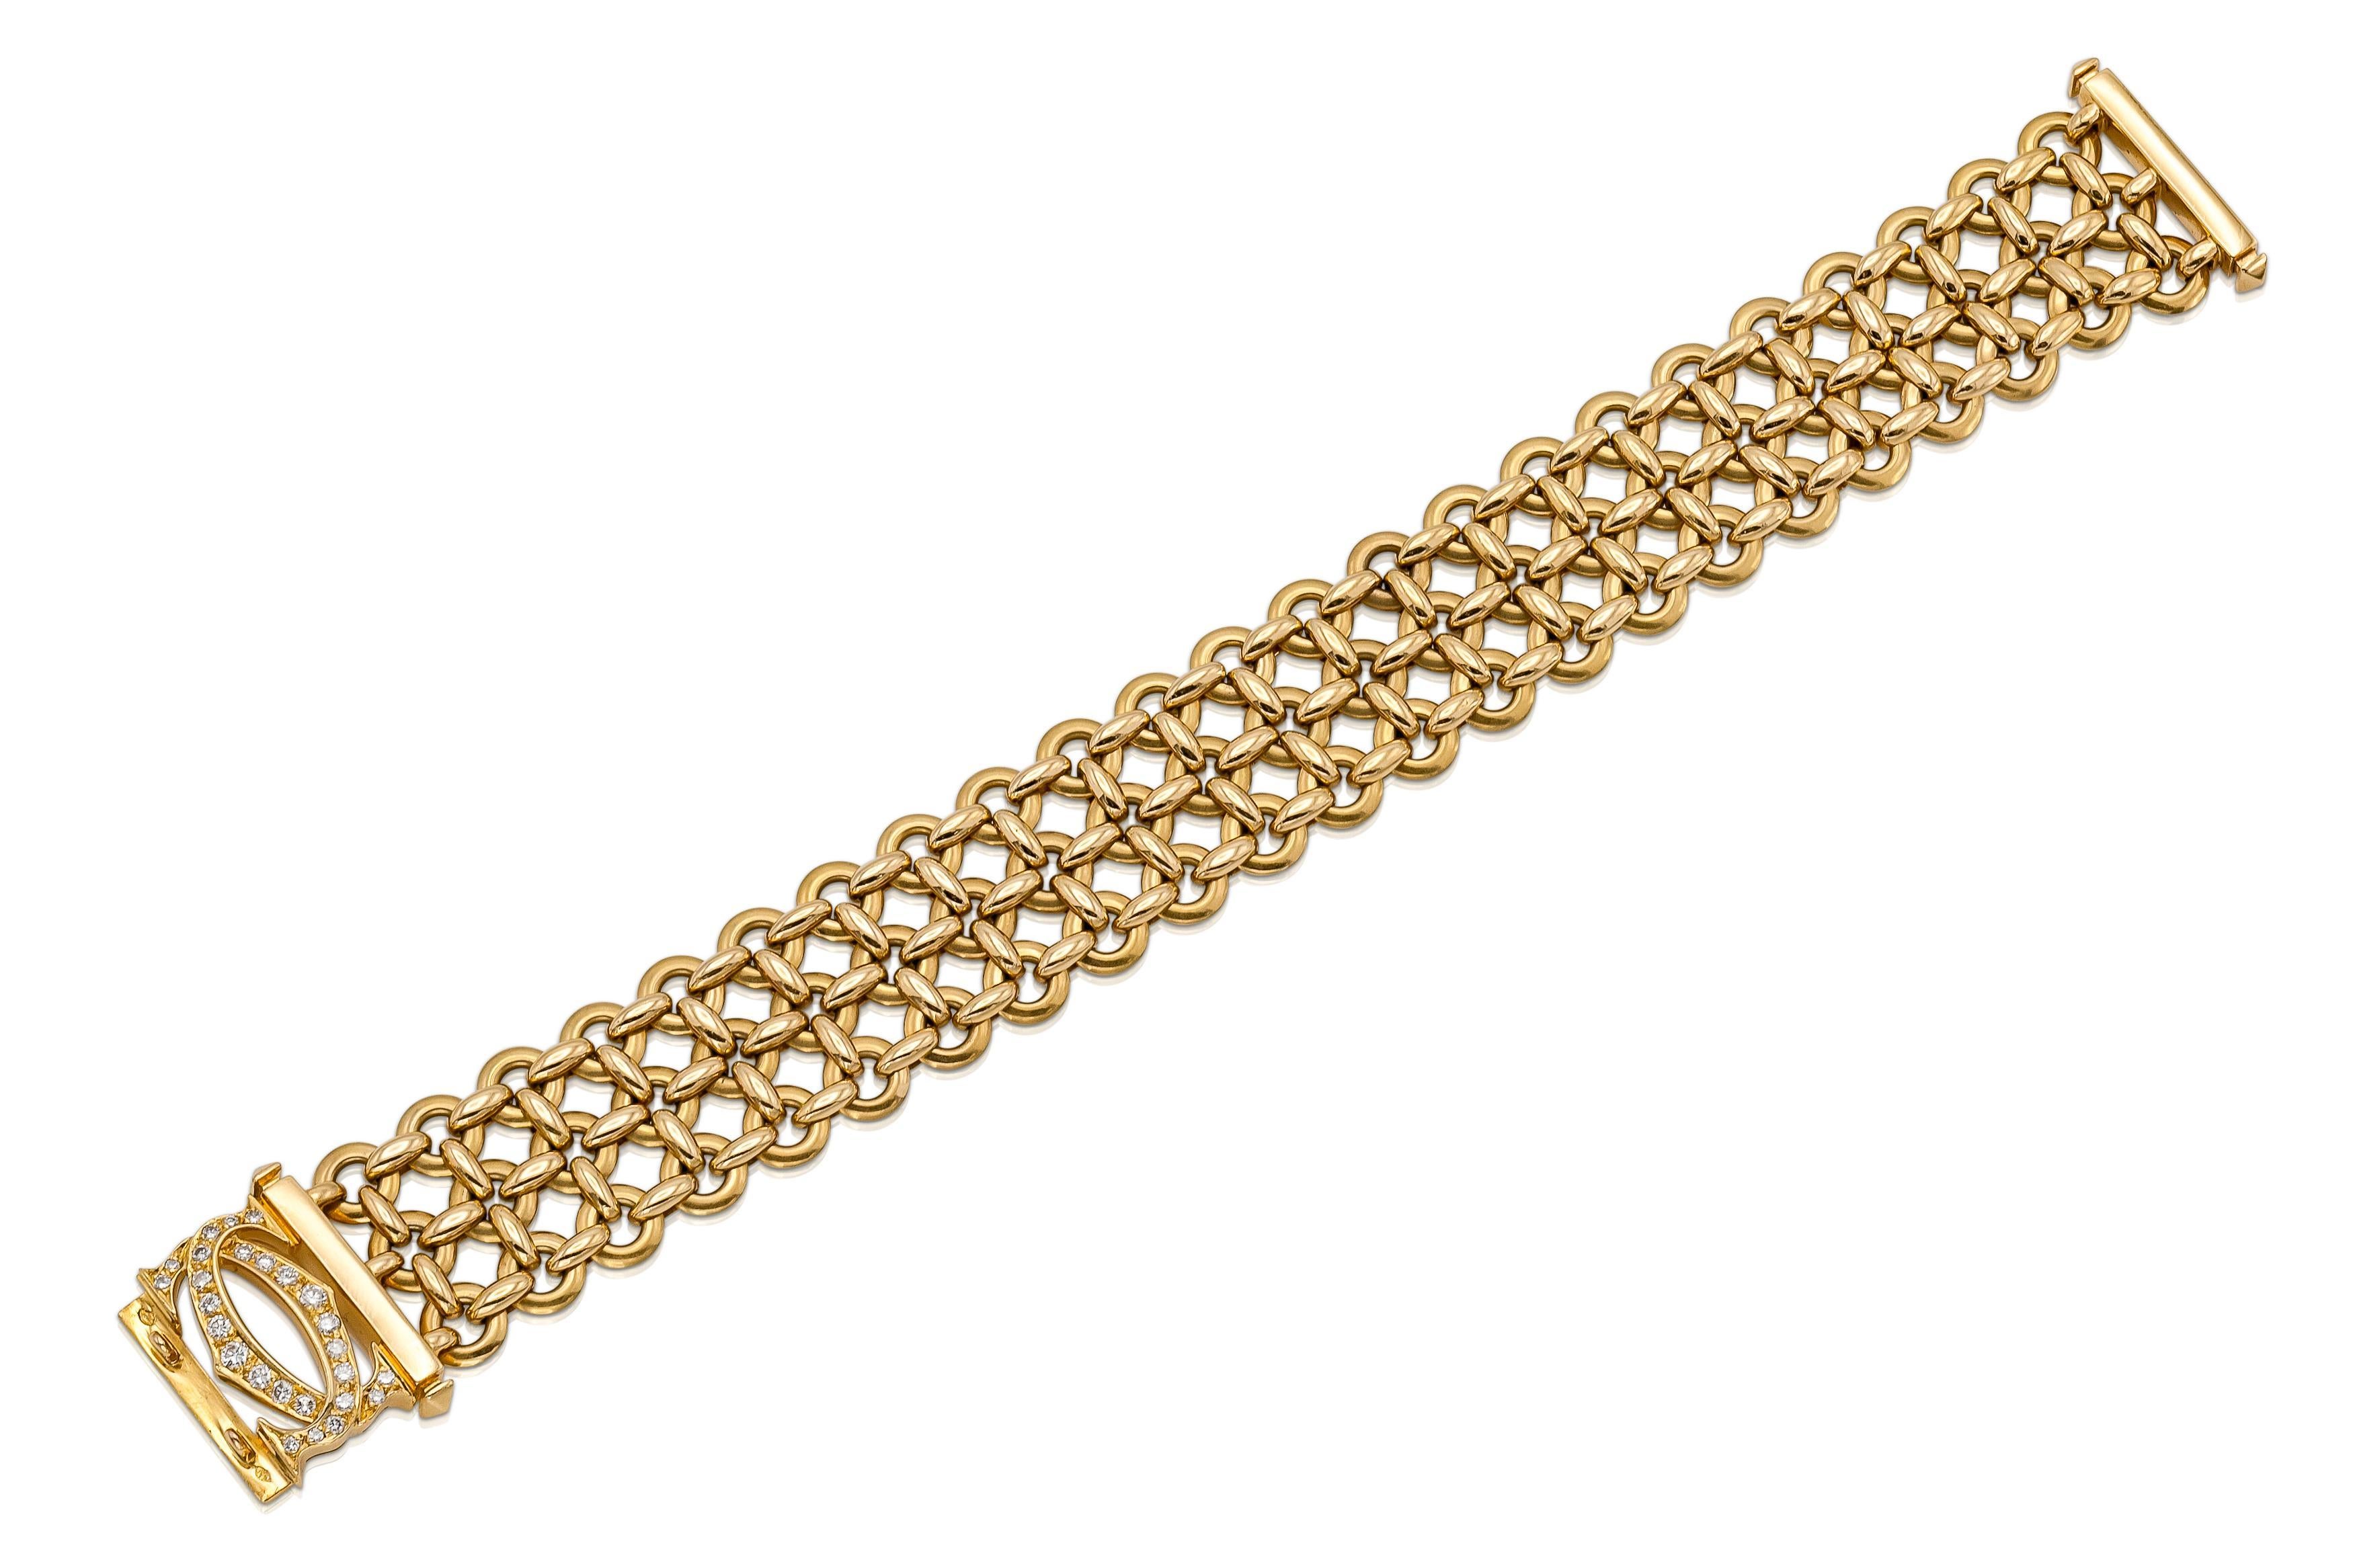 Finely crafted in 18k yellow gold with Round Brilliant cut Diamonds on the Double C Logo clasp.
Signed by Cartier, from their Penelope collection
Circa, 1990s
Size 7 inches